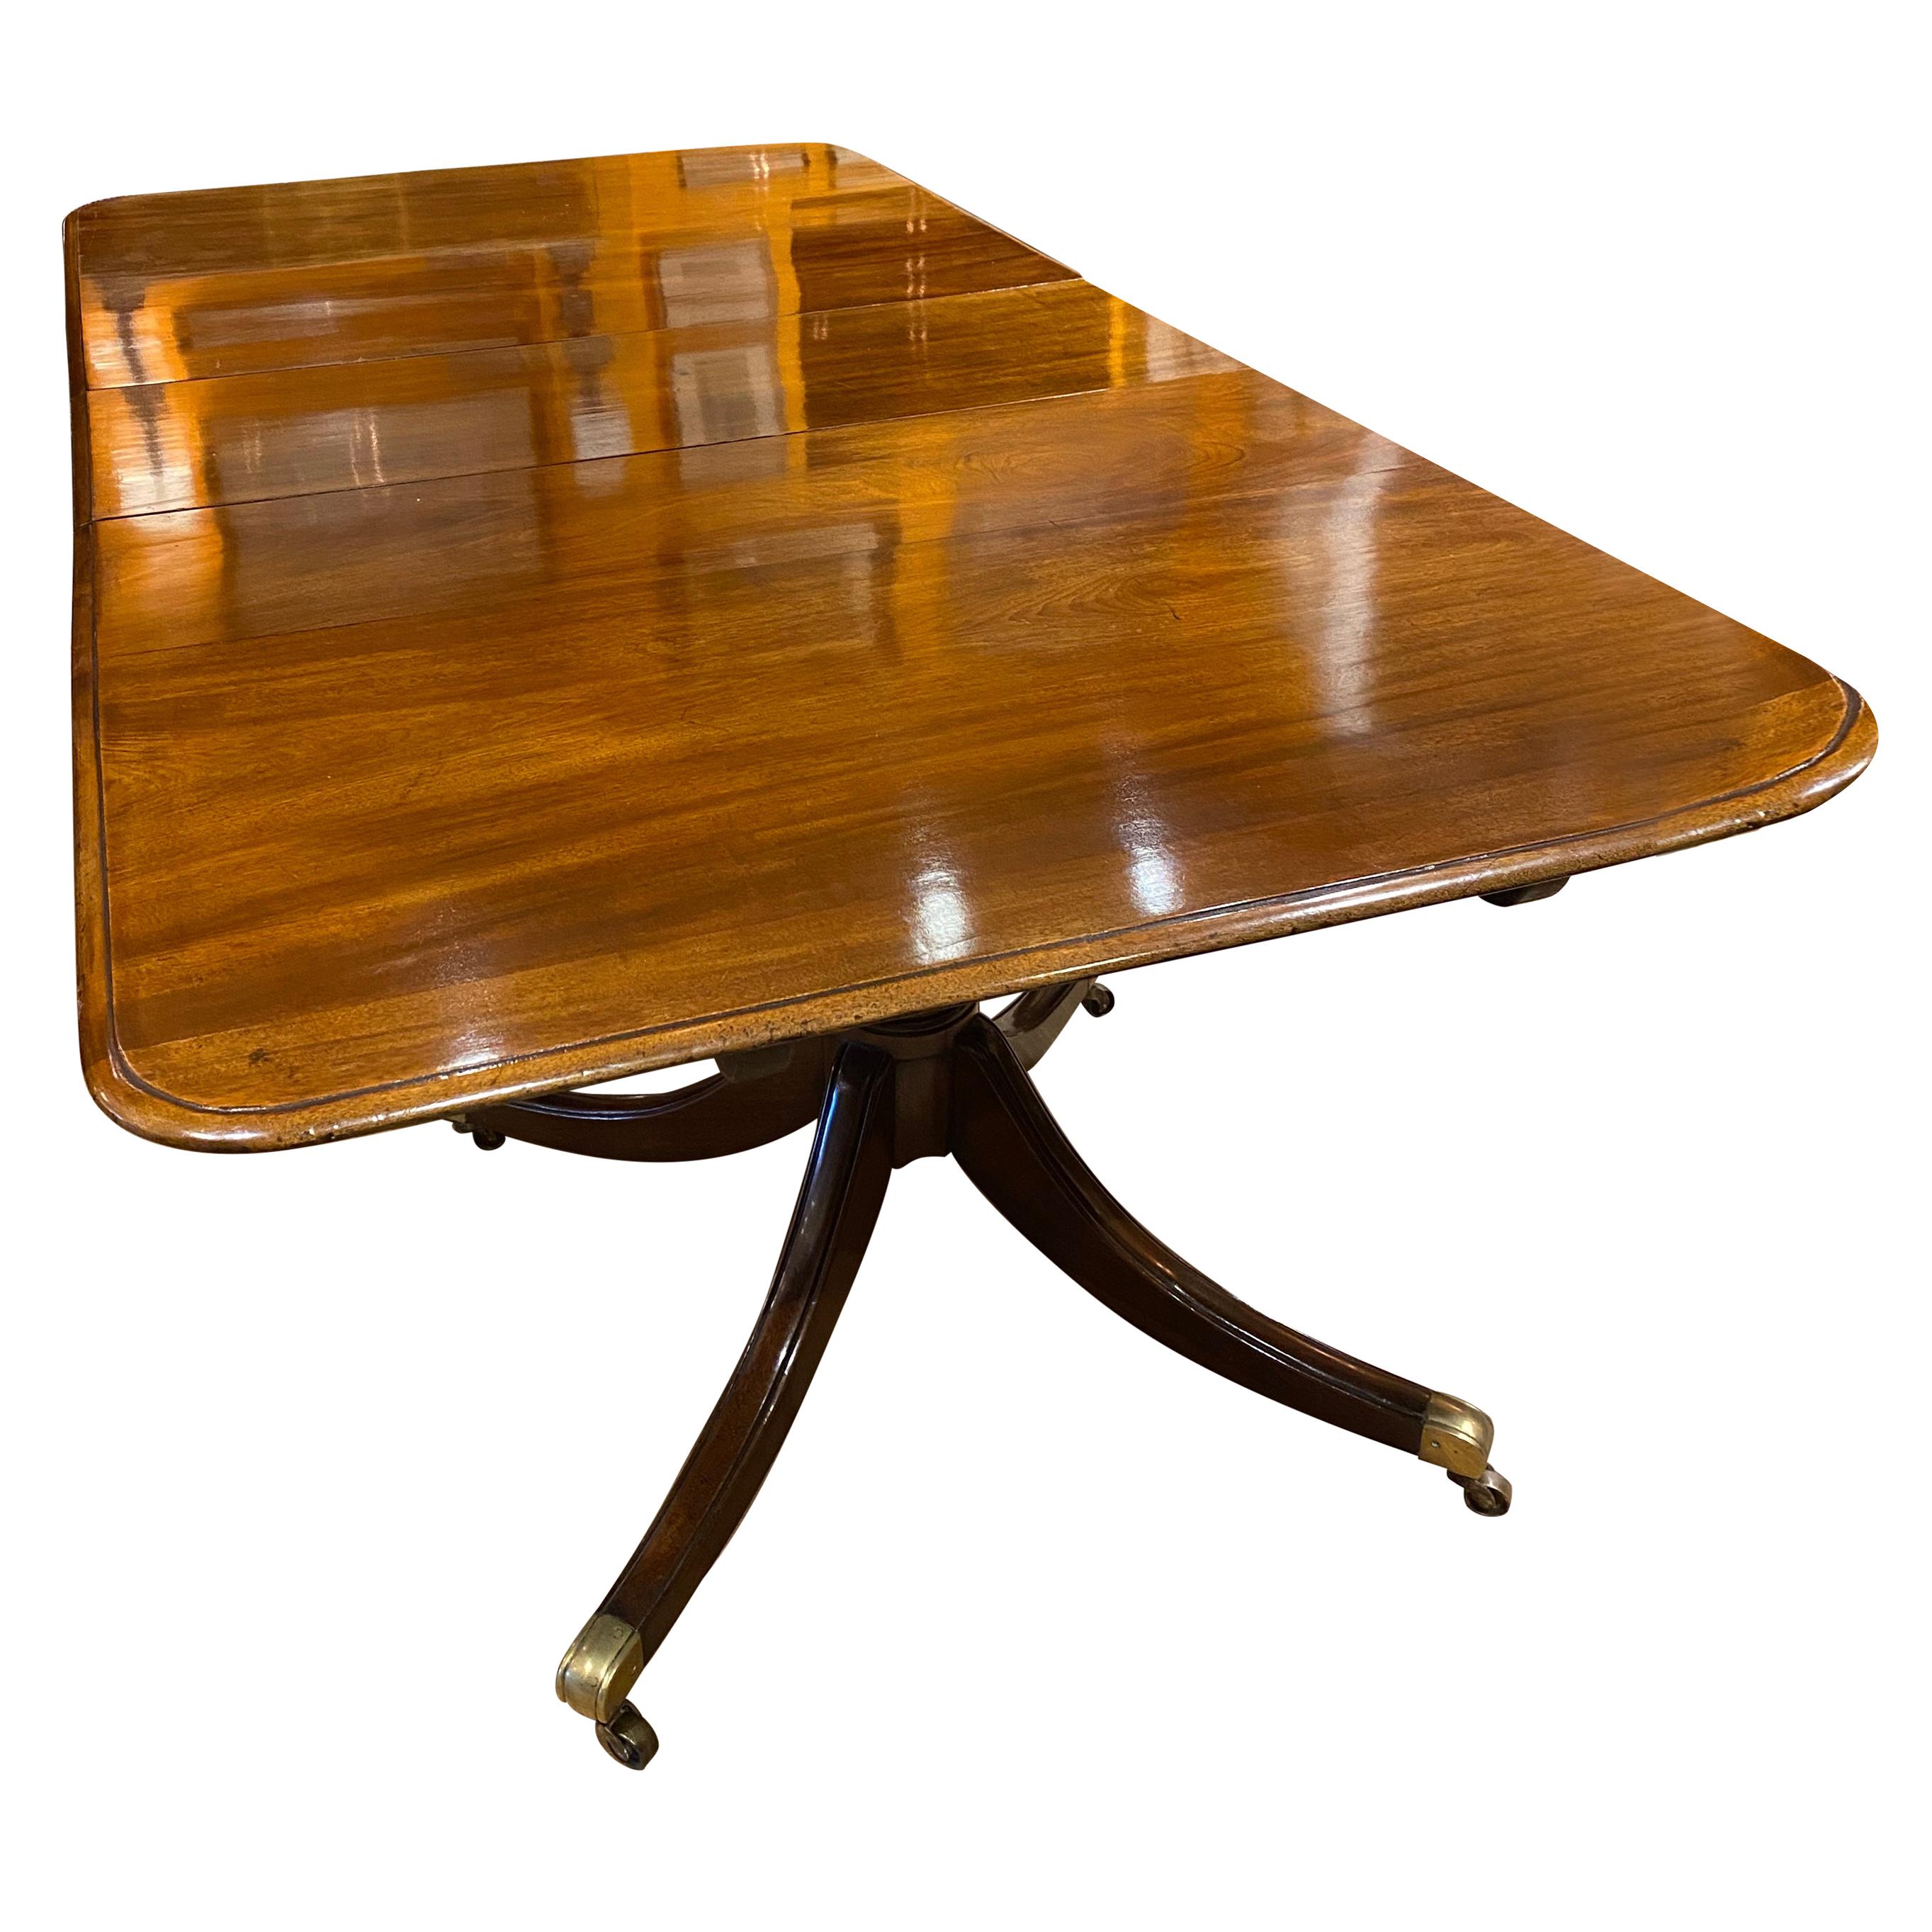 English Two Pedestal Late 19th Century Mahogany Dining Table